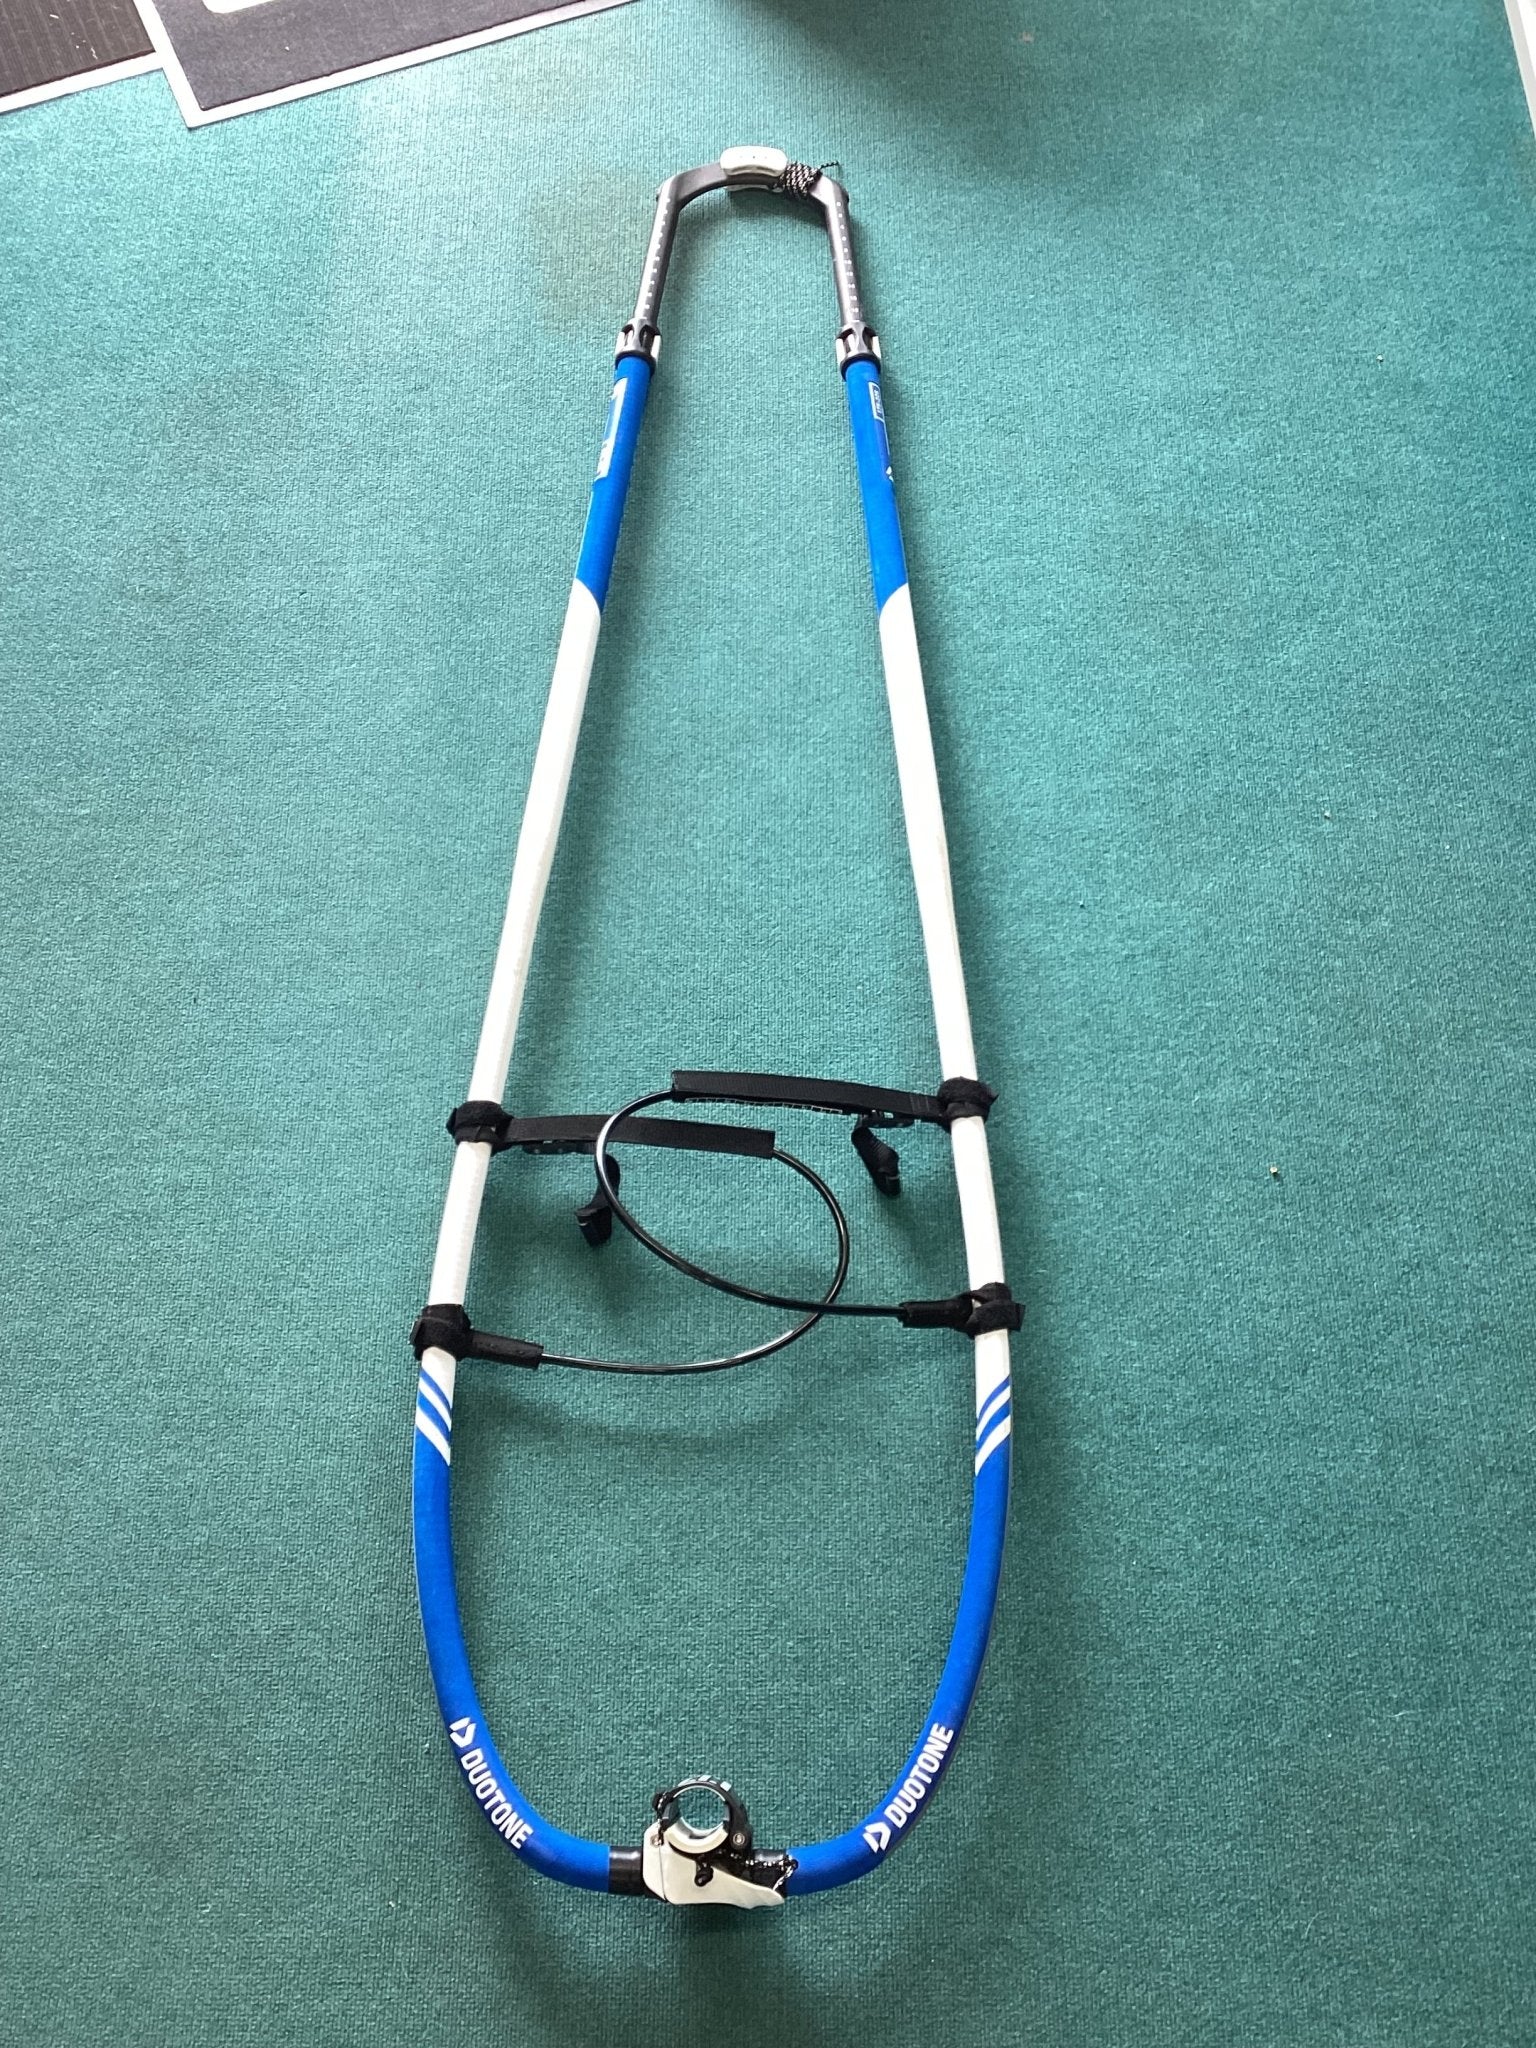 Used Duotone 100% Carbon EPX series windsurfing boom 175-225 - Worthing Watersports - Windsurfing Boom - Duotone Windsurfing